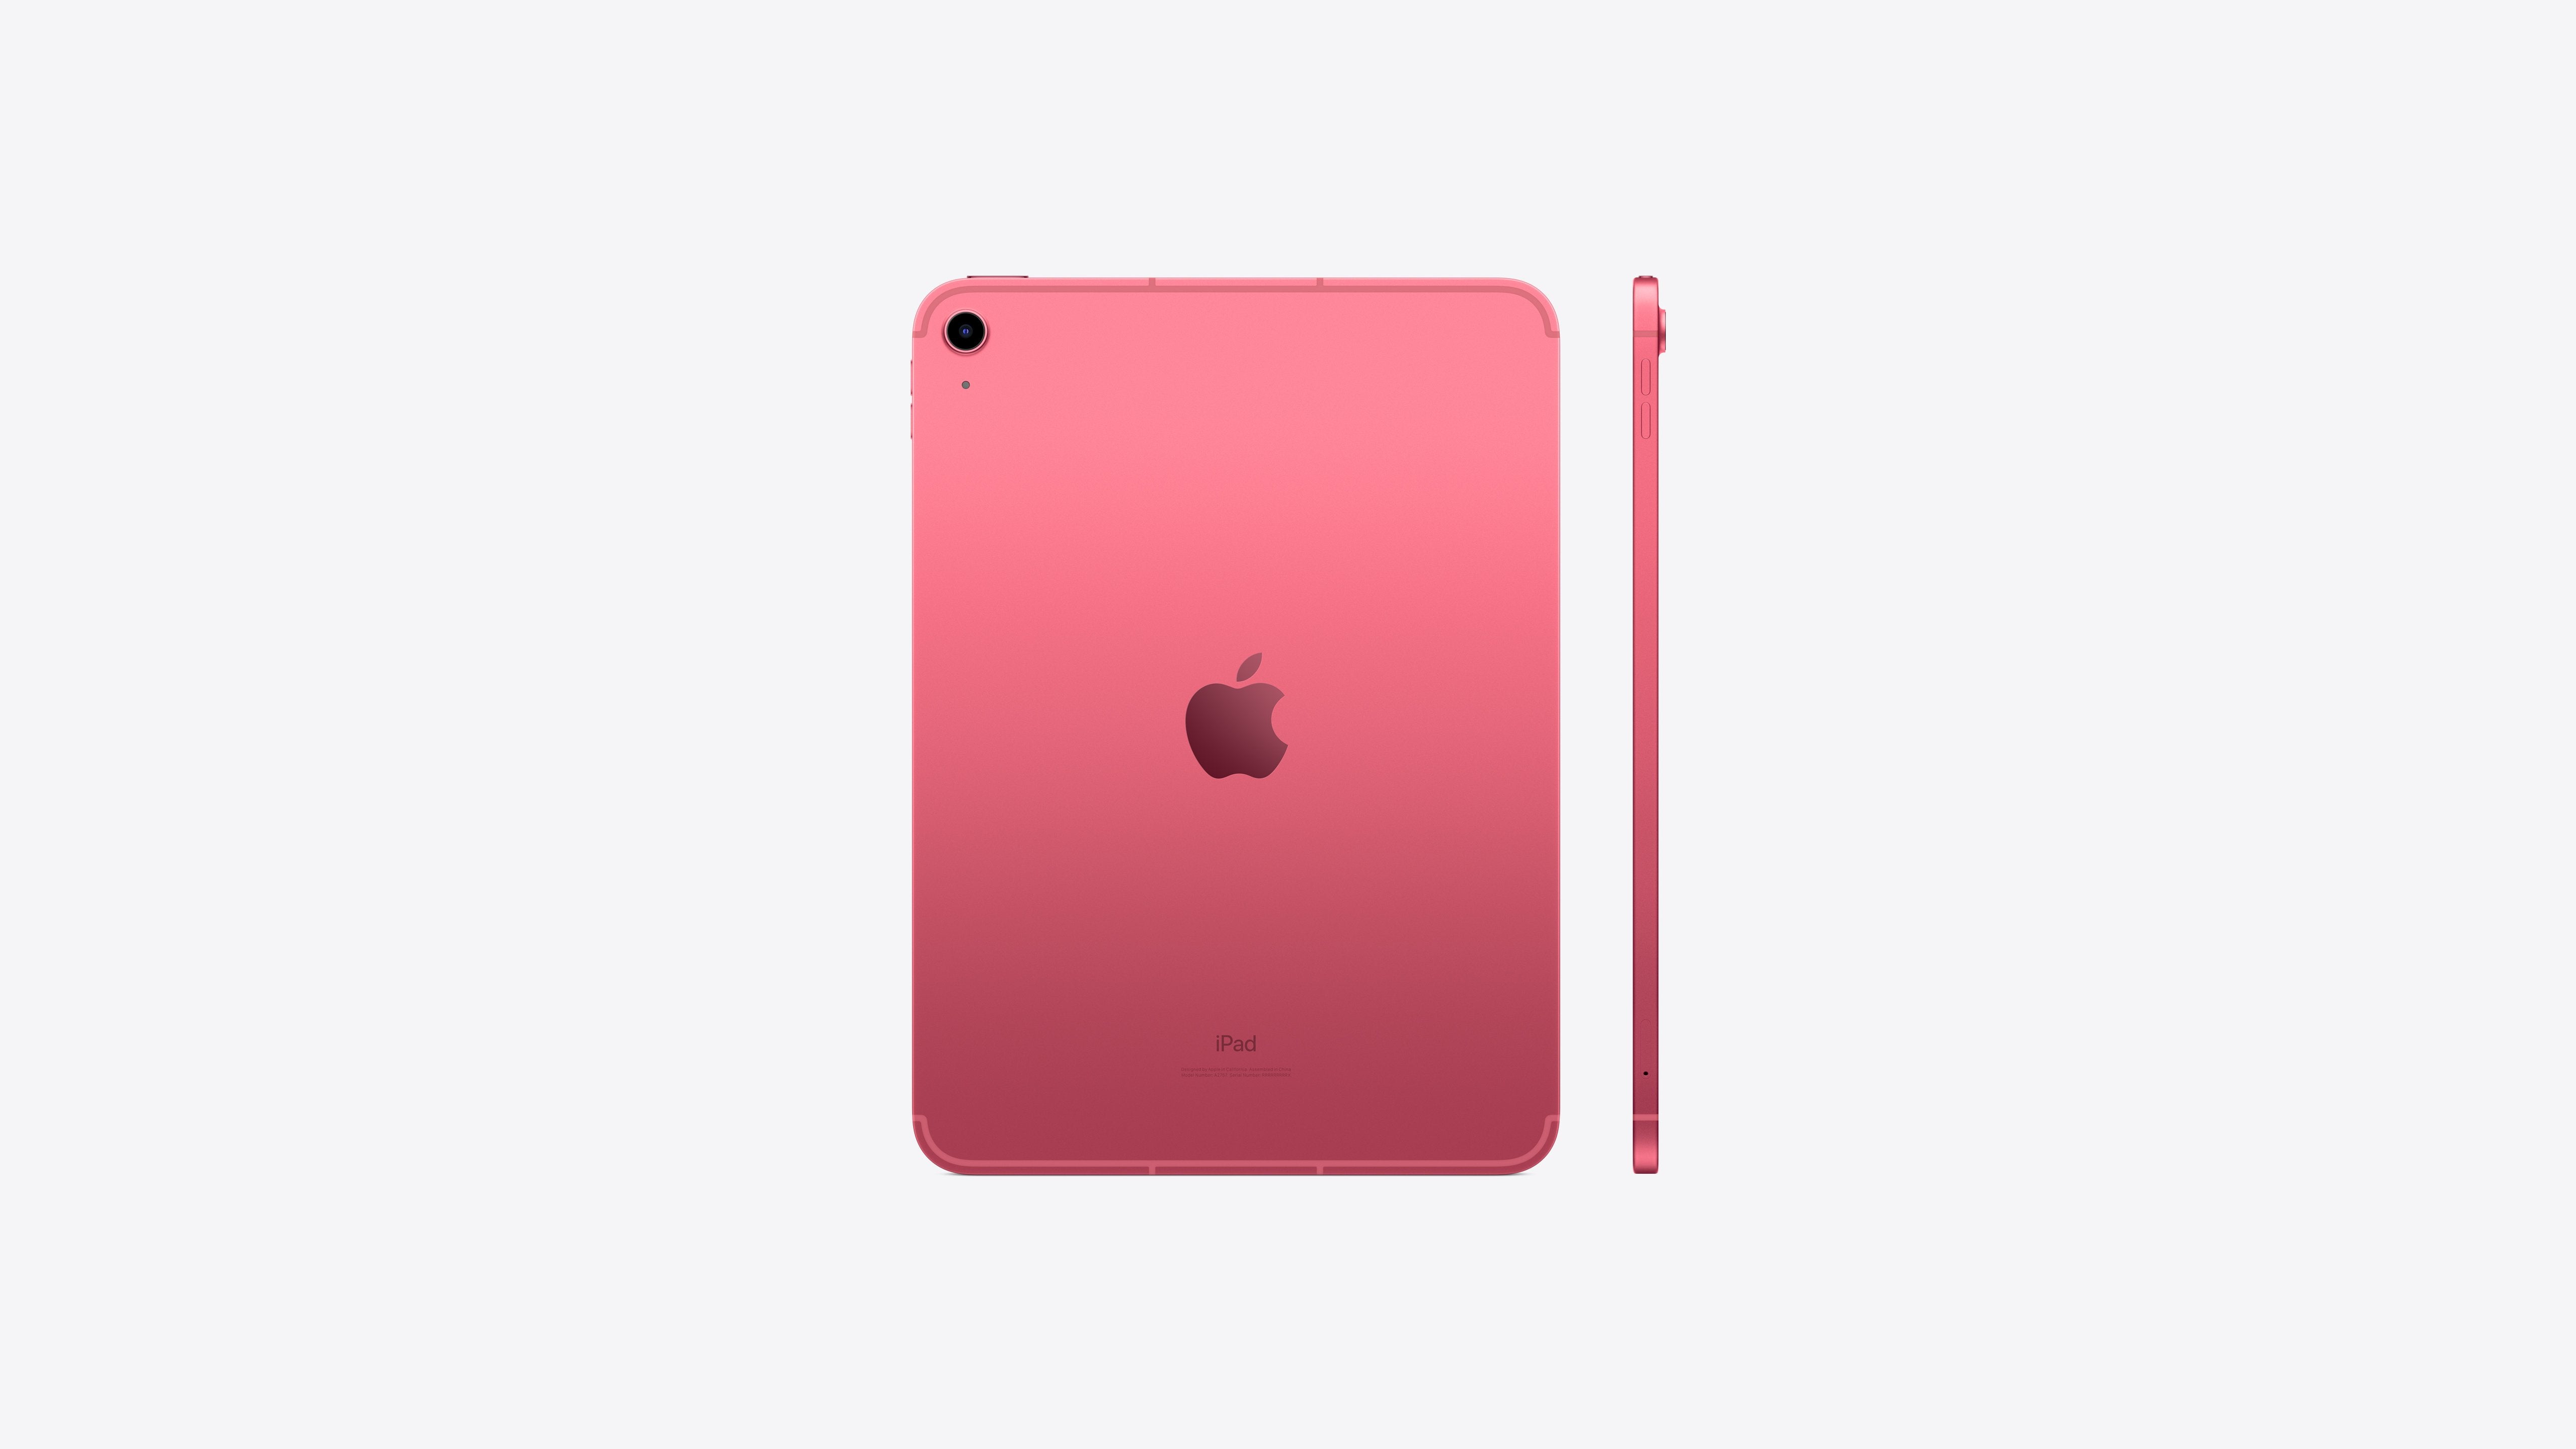 MM6T3AB/A/10.9-inch iPad Air Wi-Fi + Cellular 64GB - Pink 64 / Pink / YES